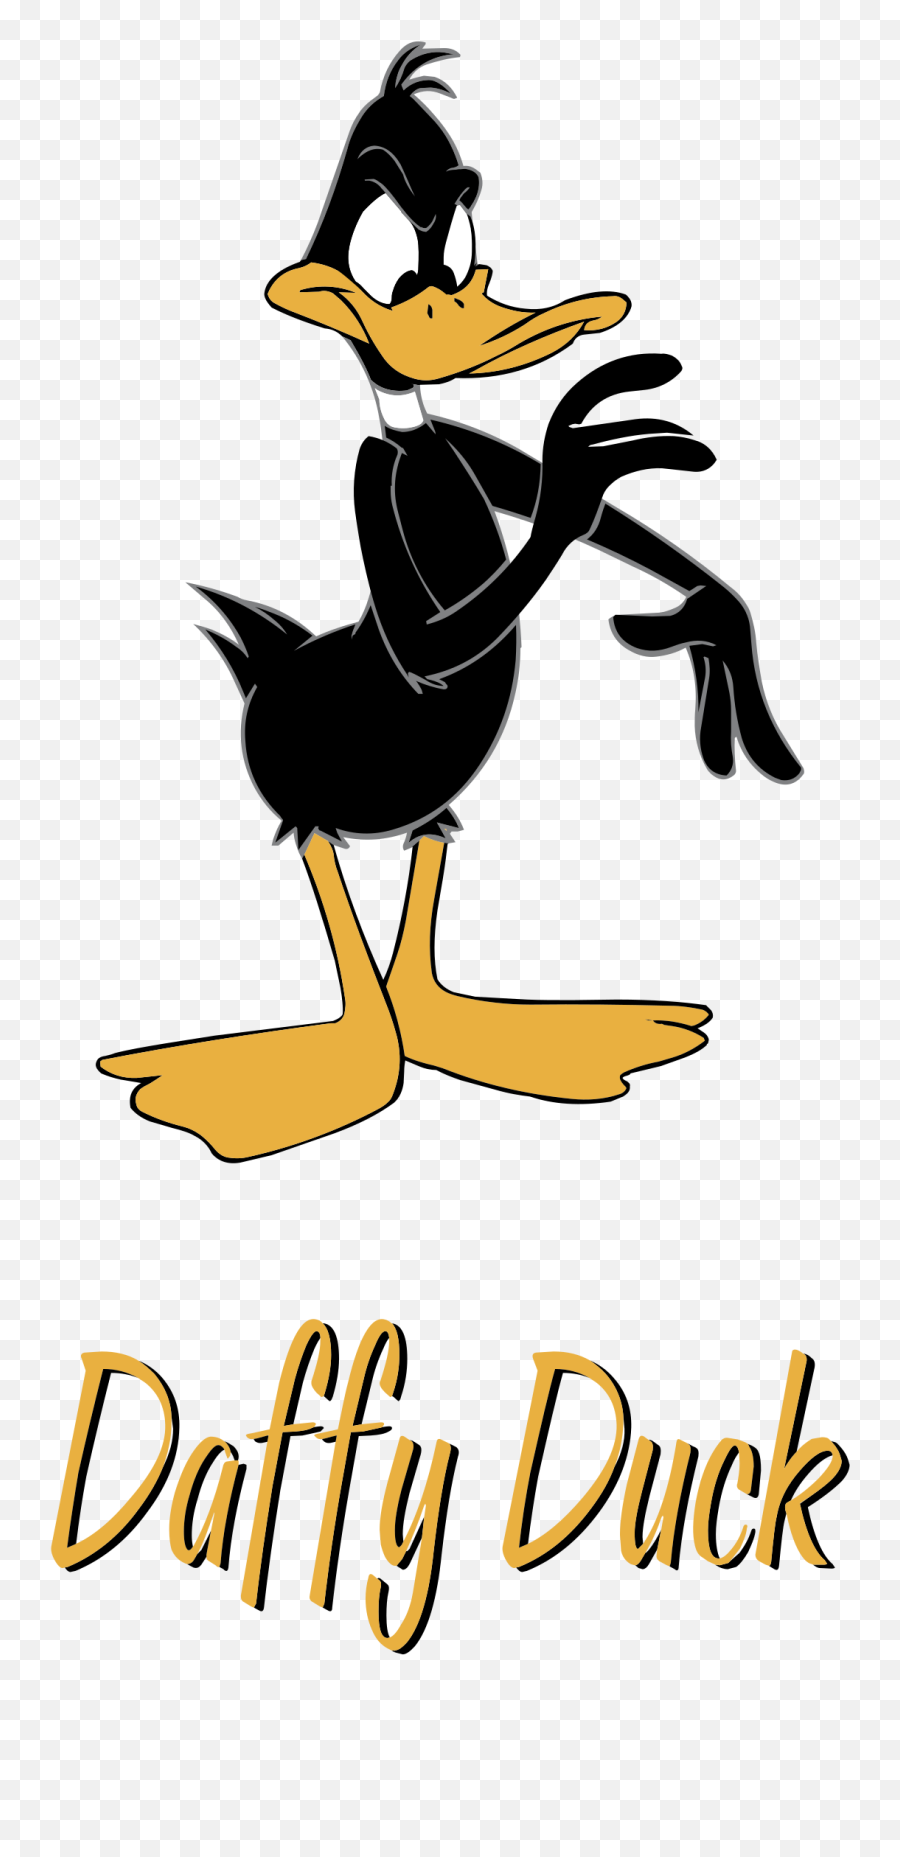 Daffy Duck Logo Png Transparent - Daffy Duck Free Vector,Daffy Duck Png